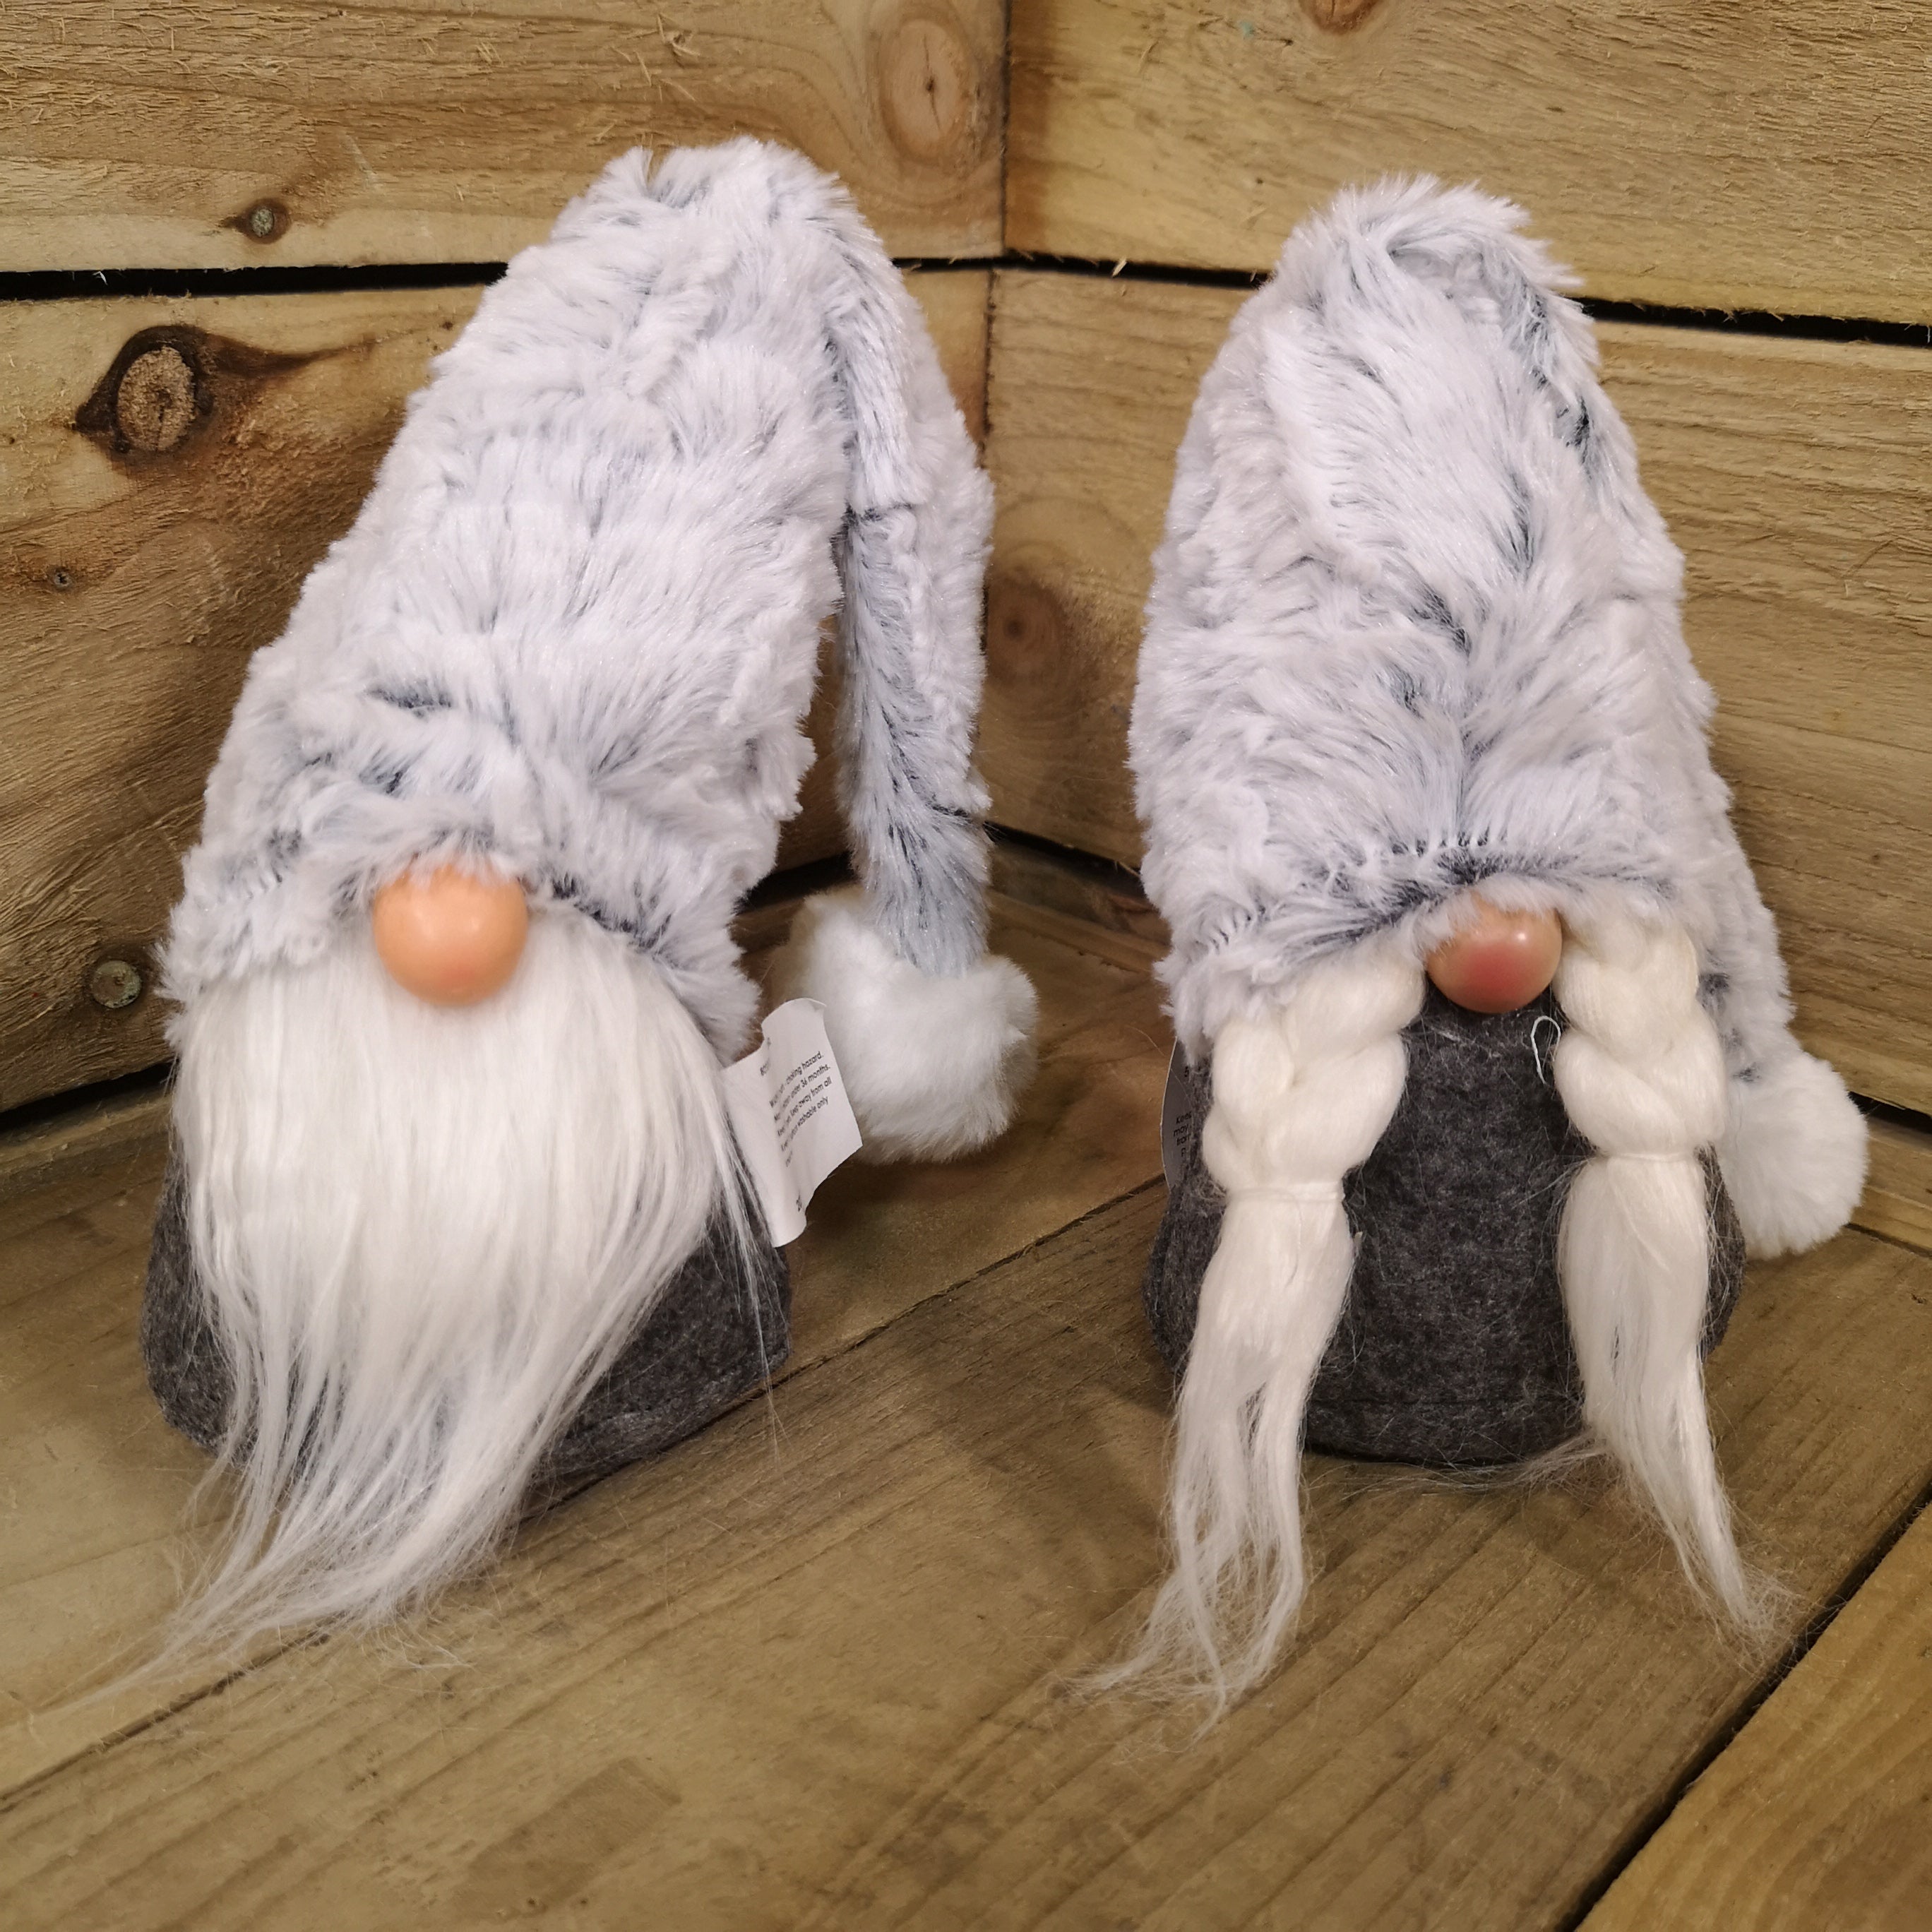 40cm Festive Christmas Sitting Grey Gonk with Fur Hat - Choice of Male or Female